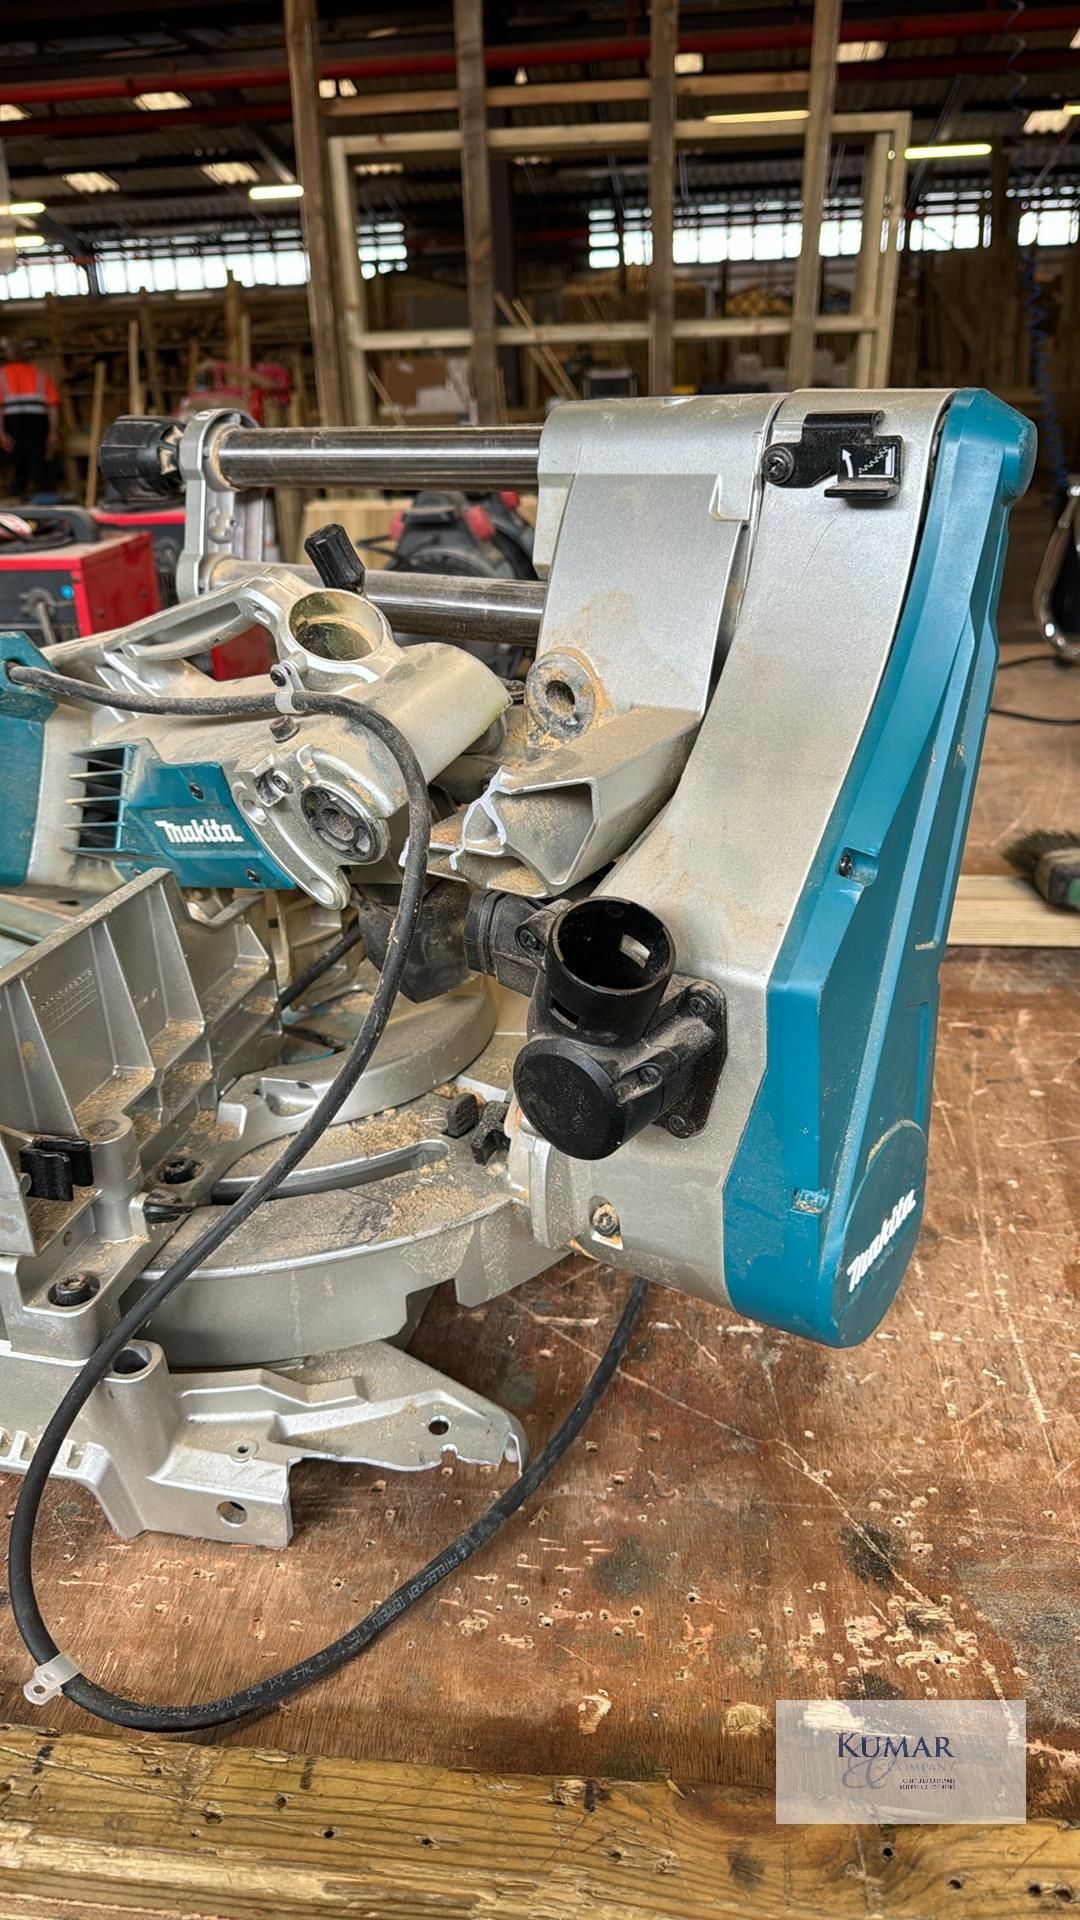 Makita LS1219 305mm Slide Compound Mitre Saw, Serial No.1176G, (06/2018) - Sold for Spares or - Image 5 of 8